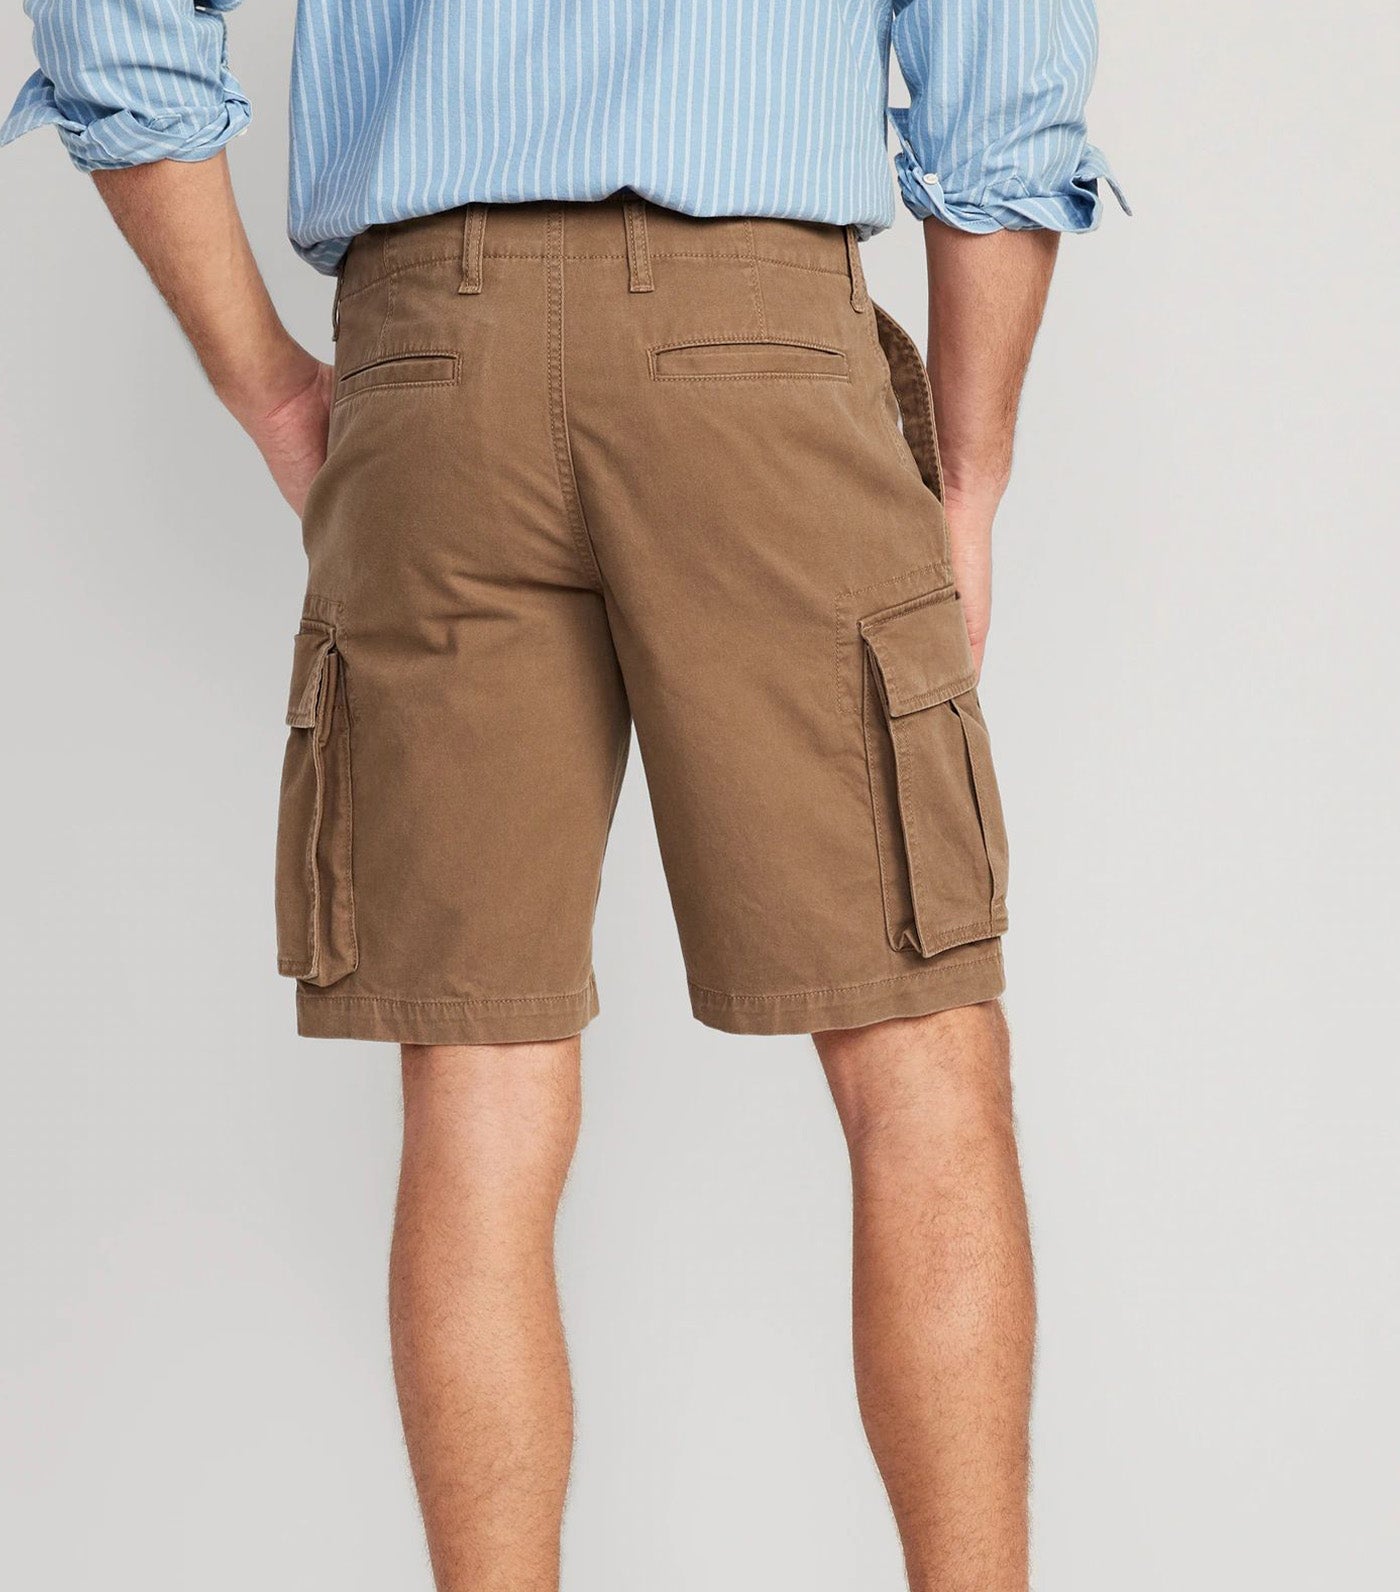 Relaxed Lived-In Cargo Shorts for Men - 10-inch Inseam Falconry